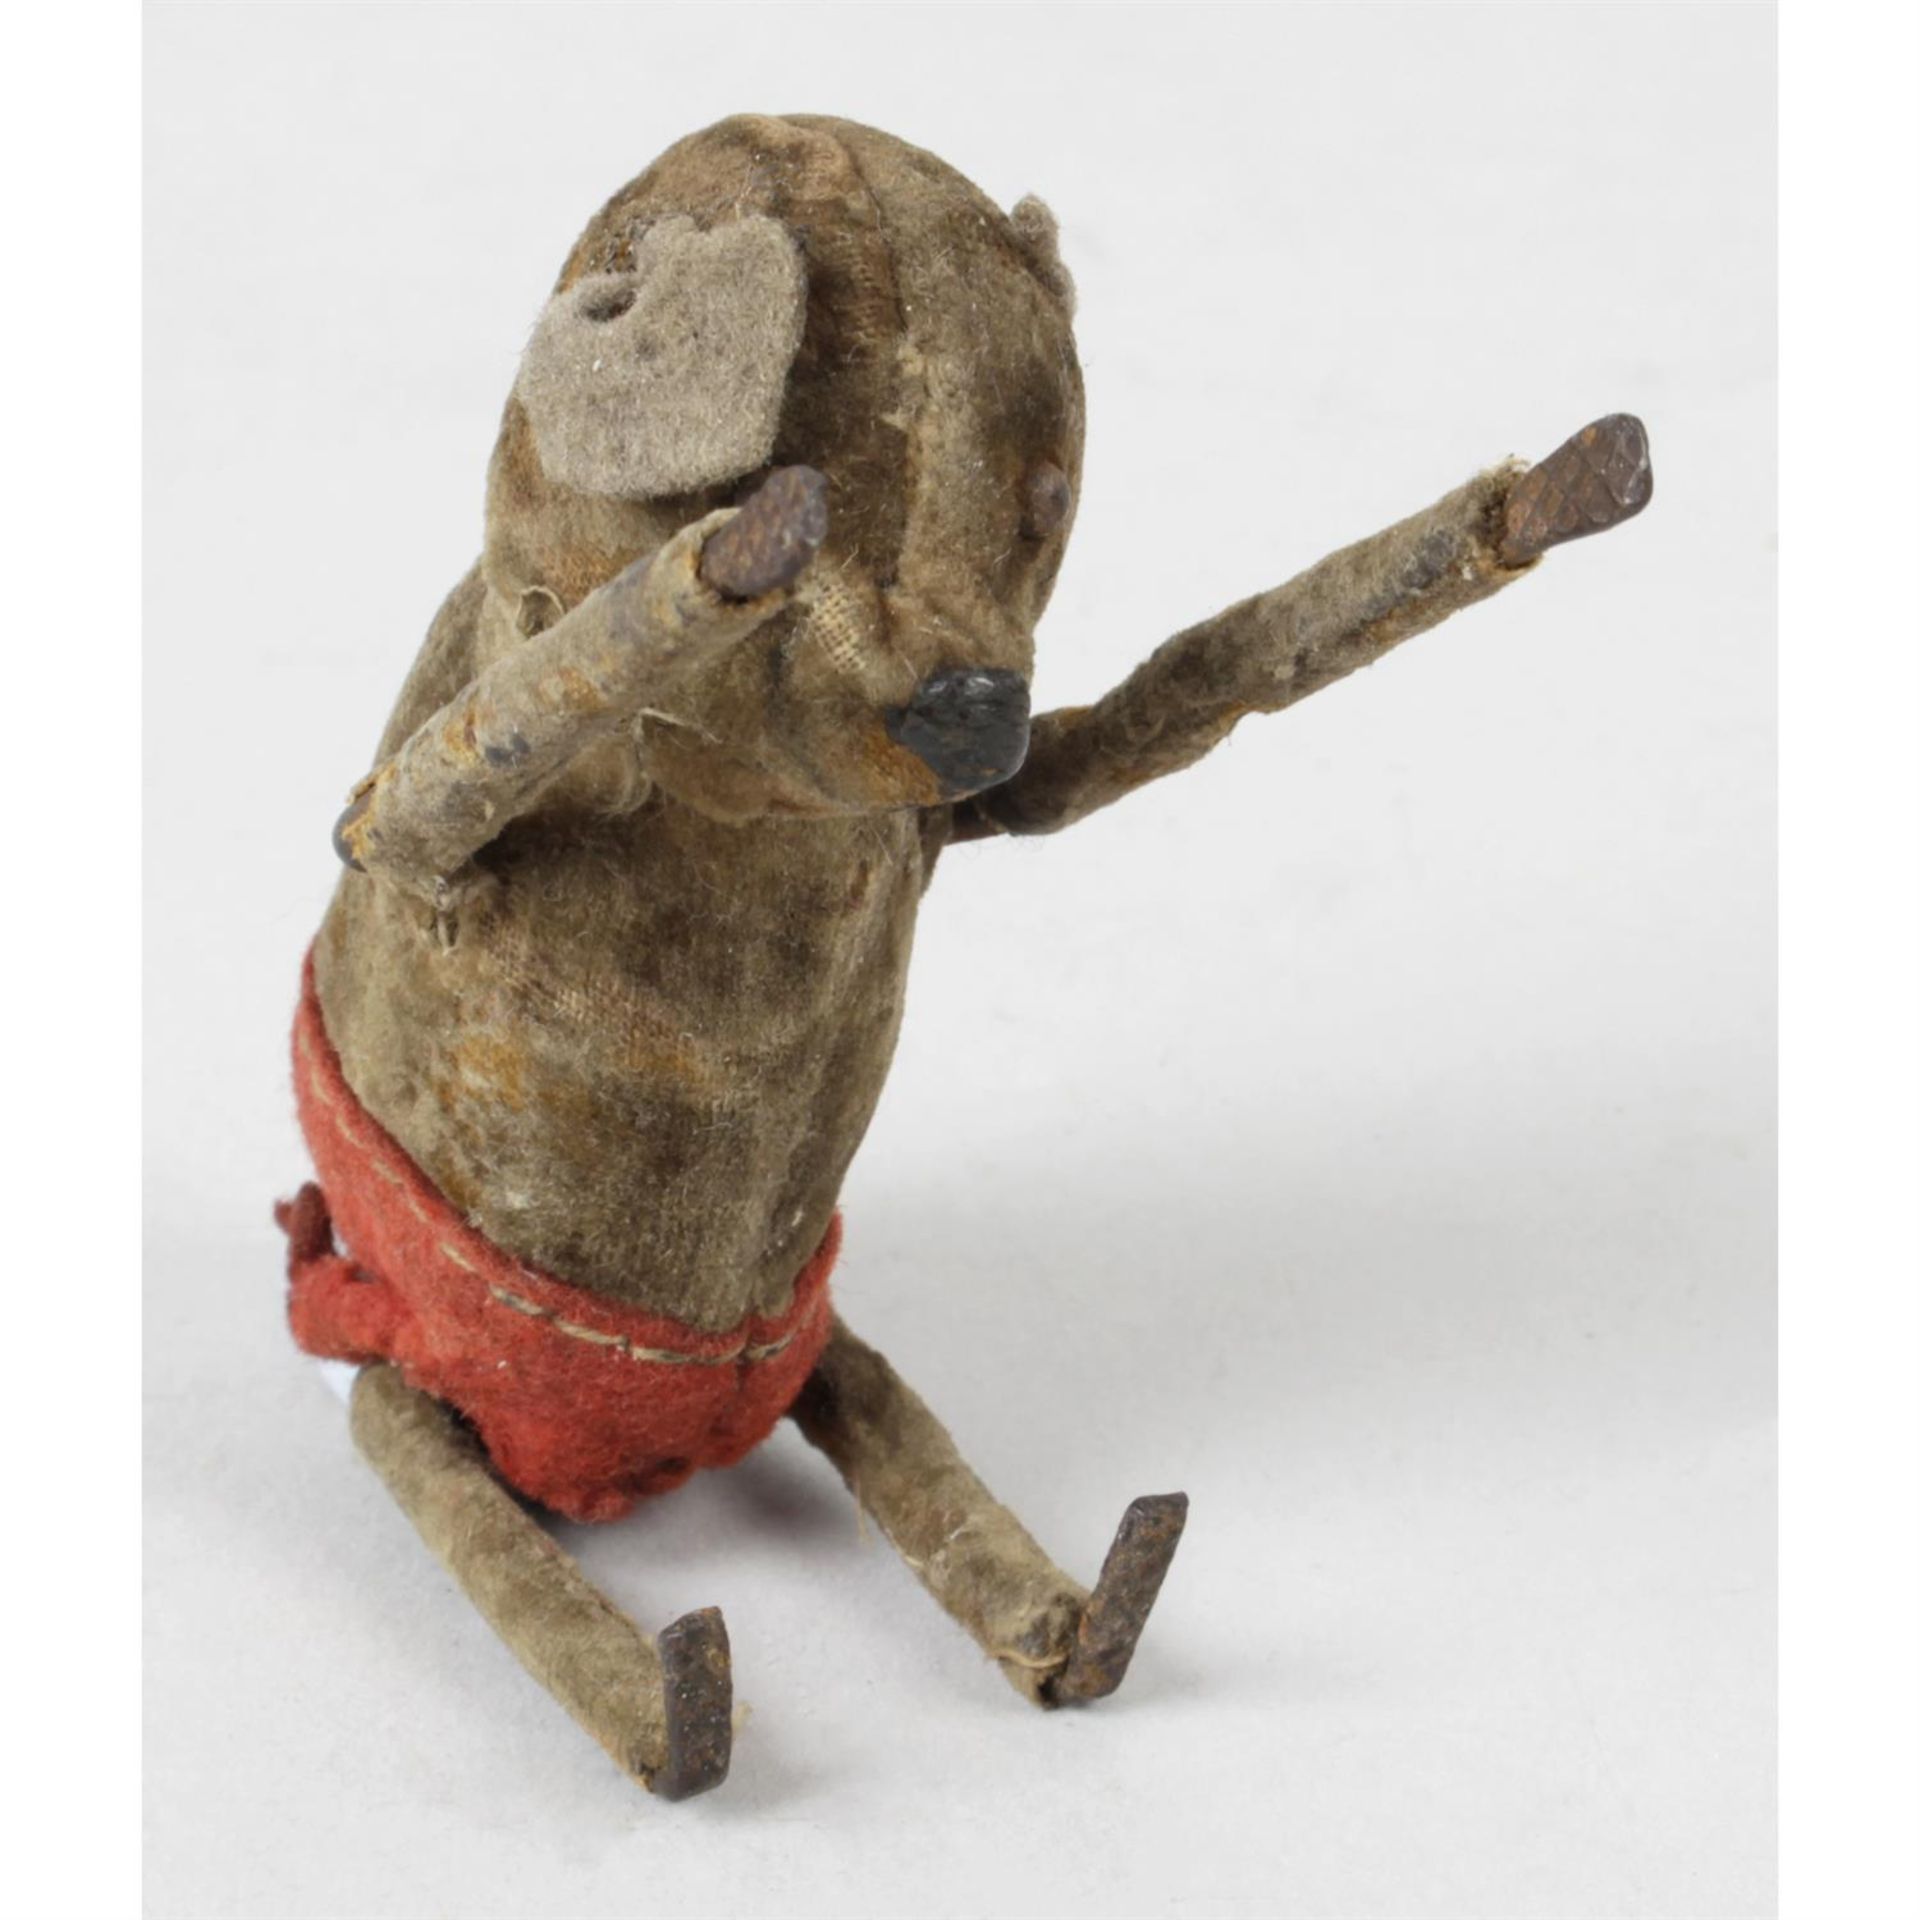 An early 20th century clockwork novelty toy, modelled as a gamboling mouse.